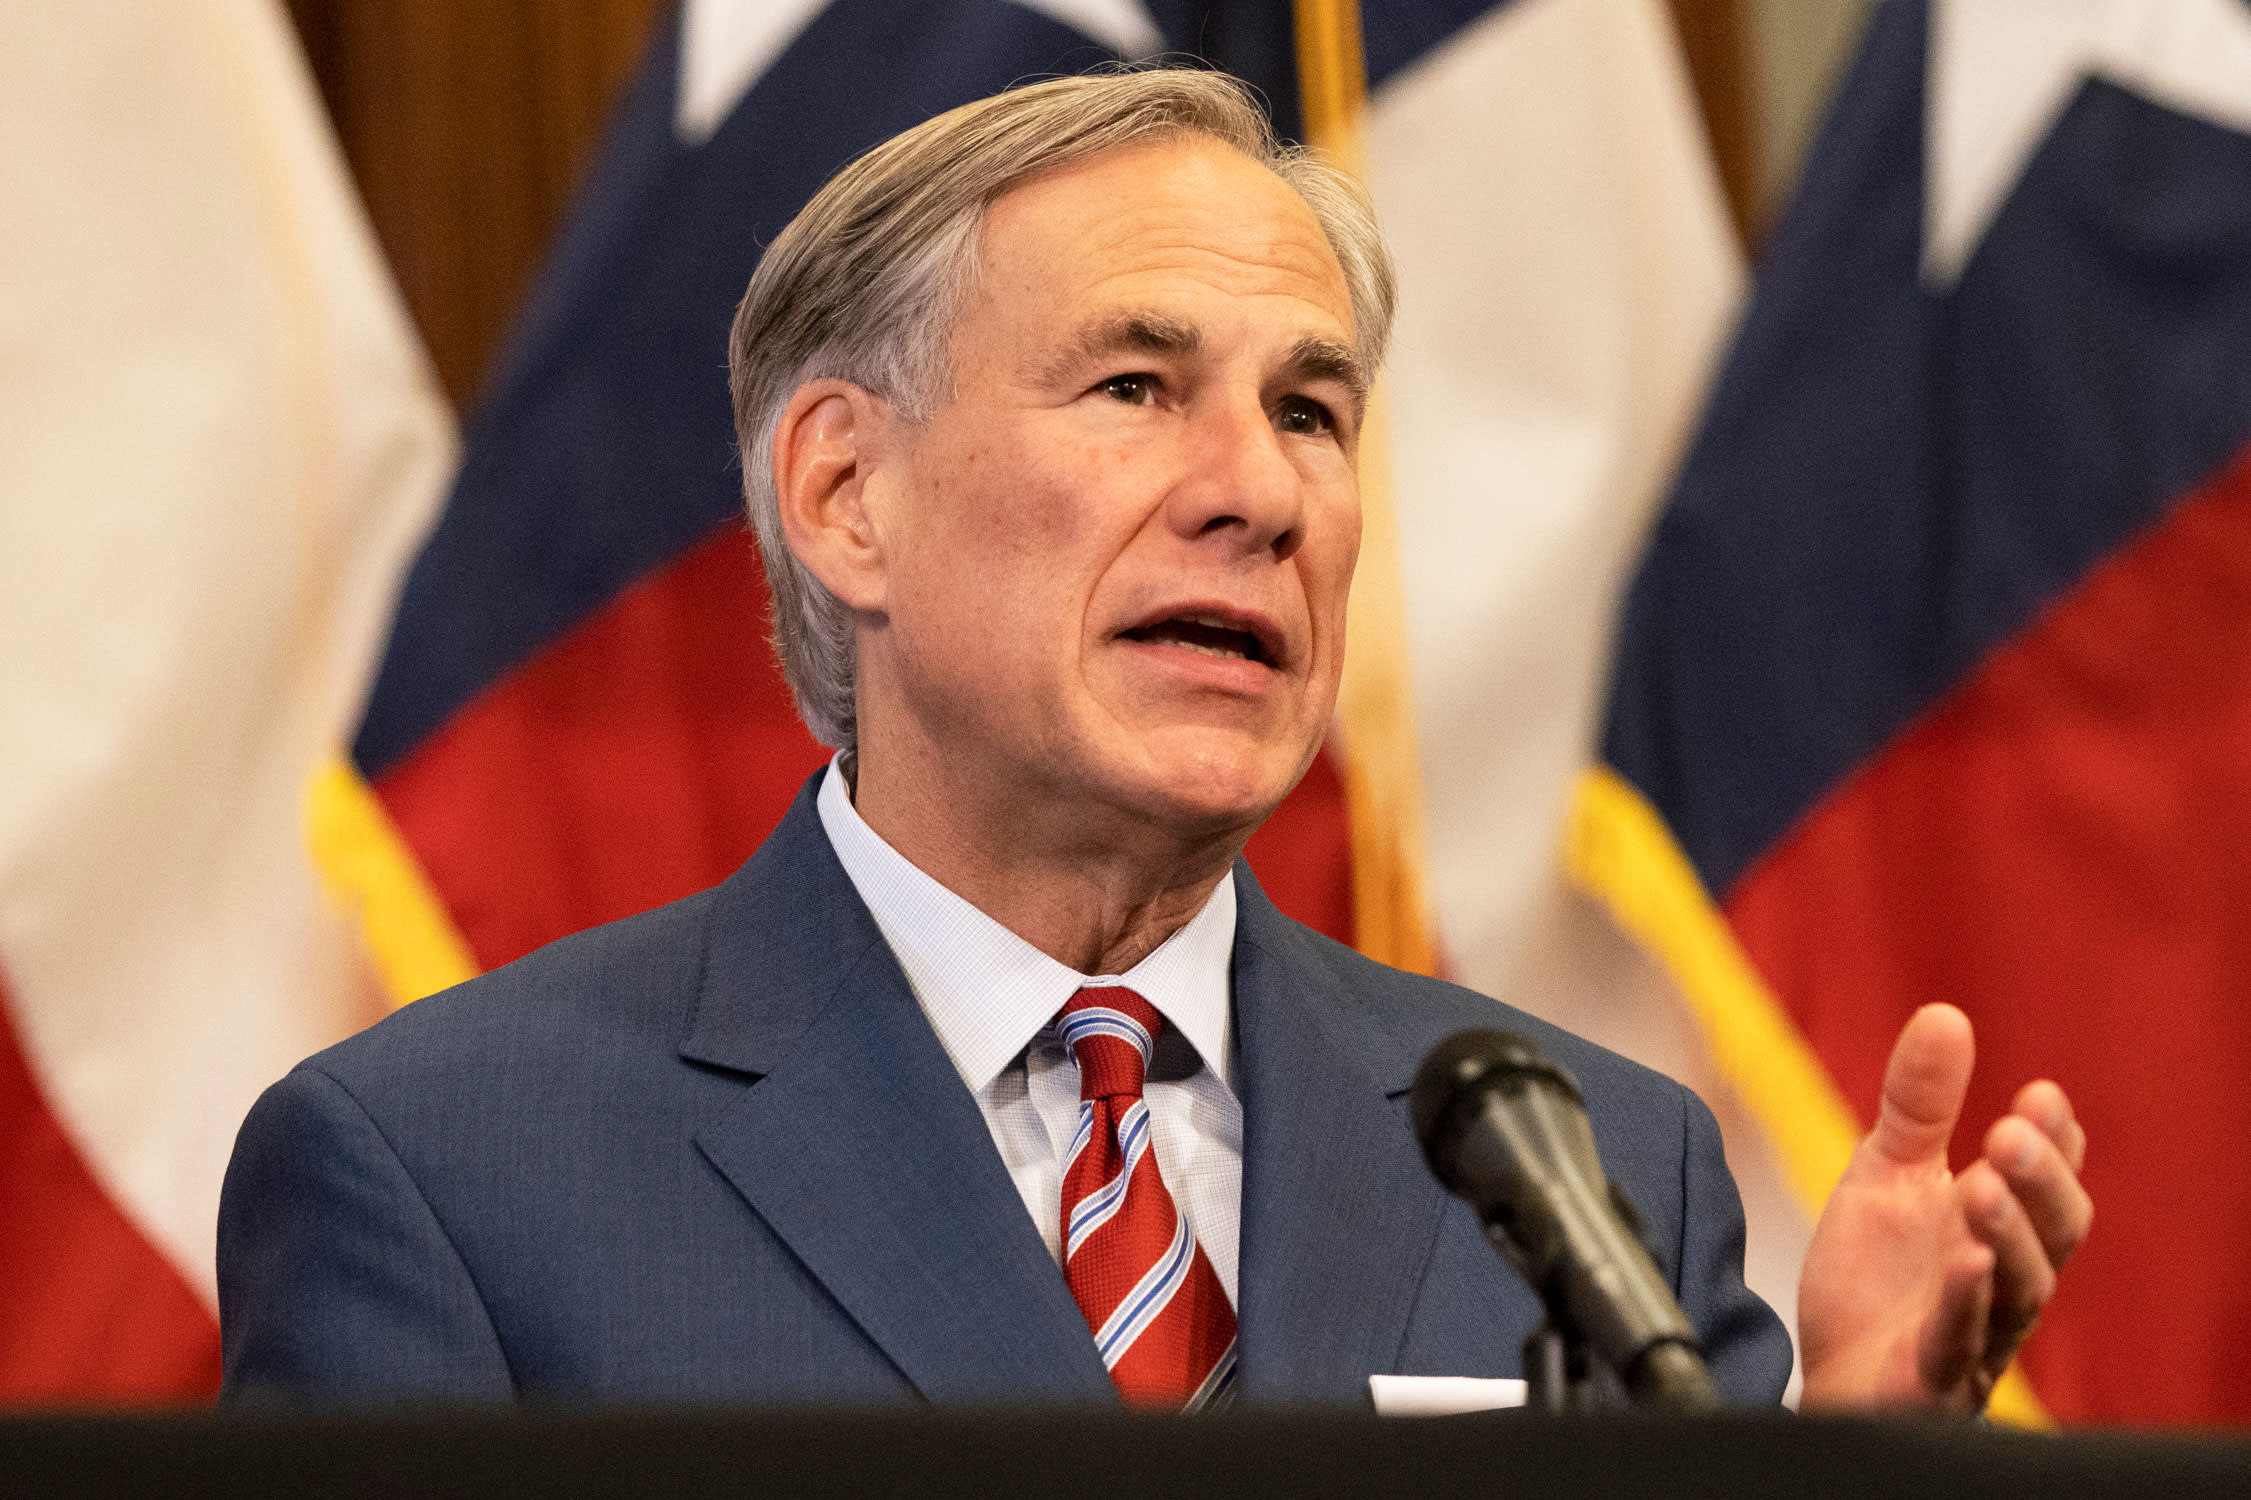 Texas Gov. Abbott deploys thousands of out-of-state medical staff to battle delta Covid surge